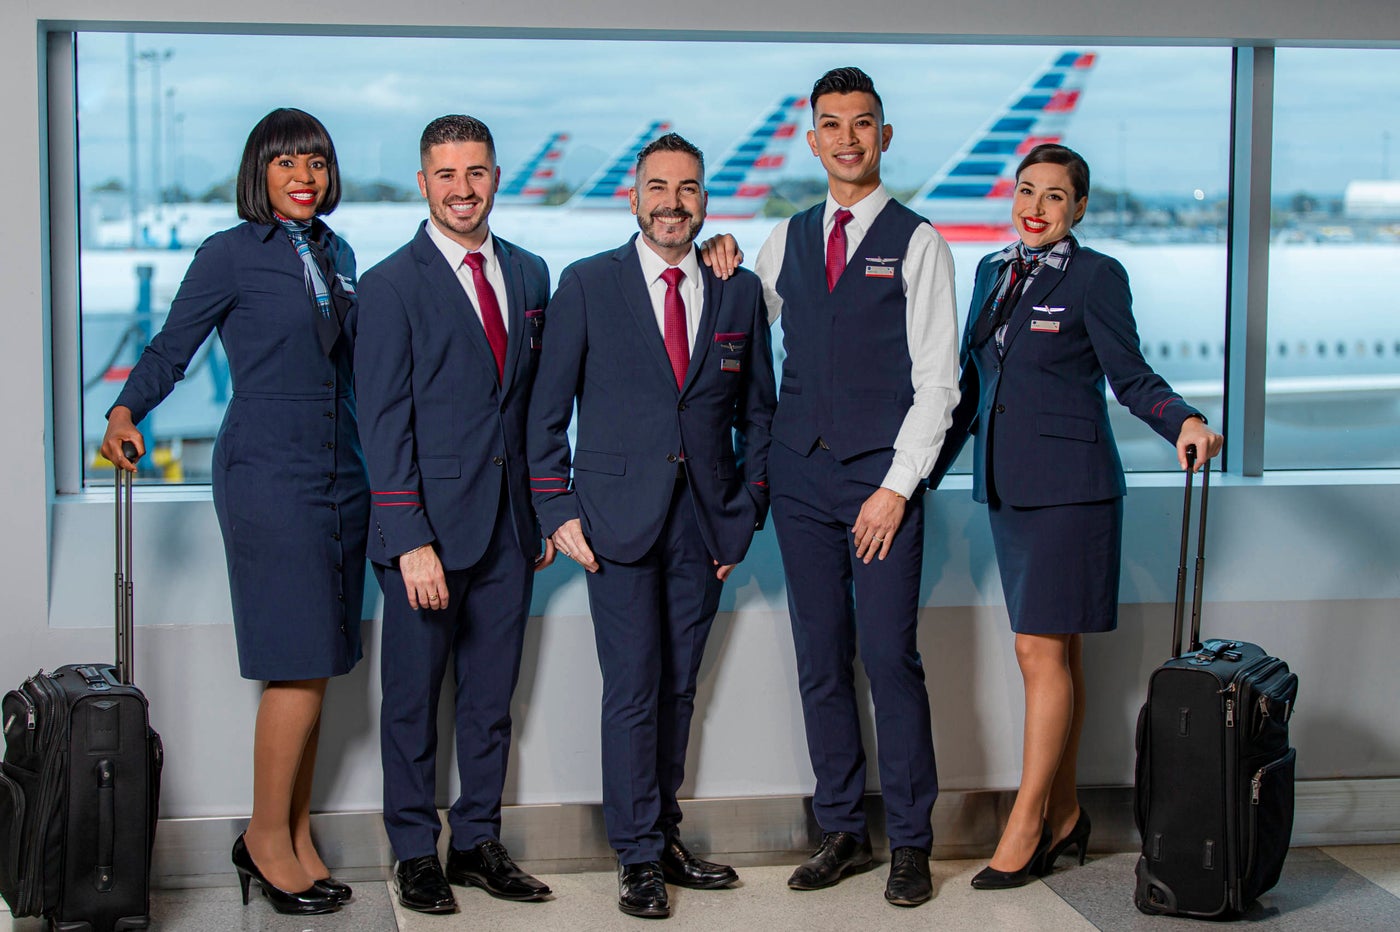 American Airlines rolls out new, new uniforms